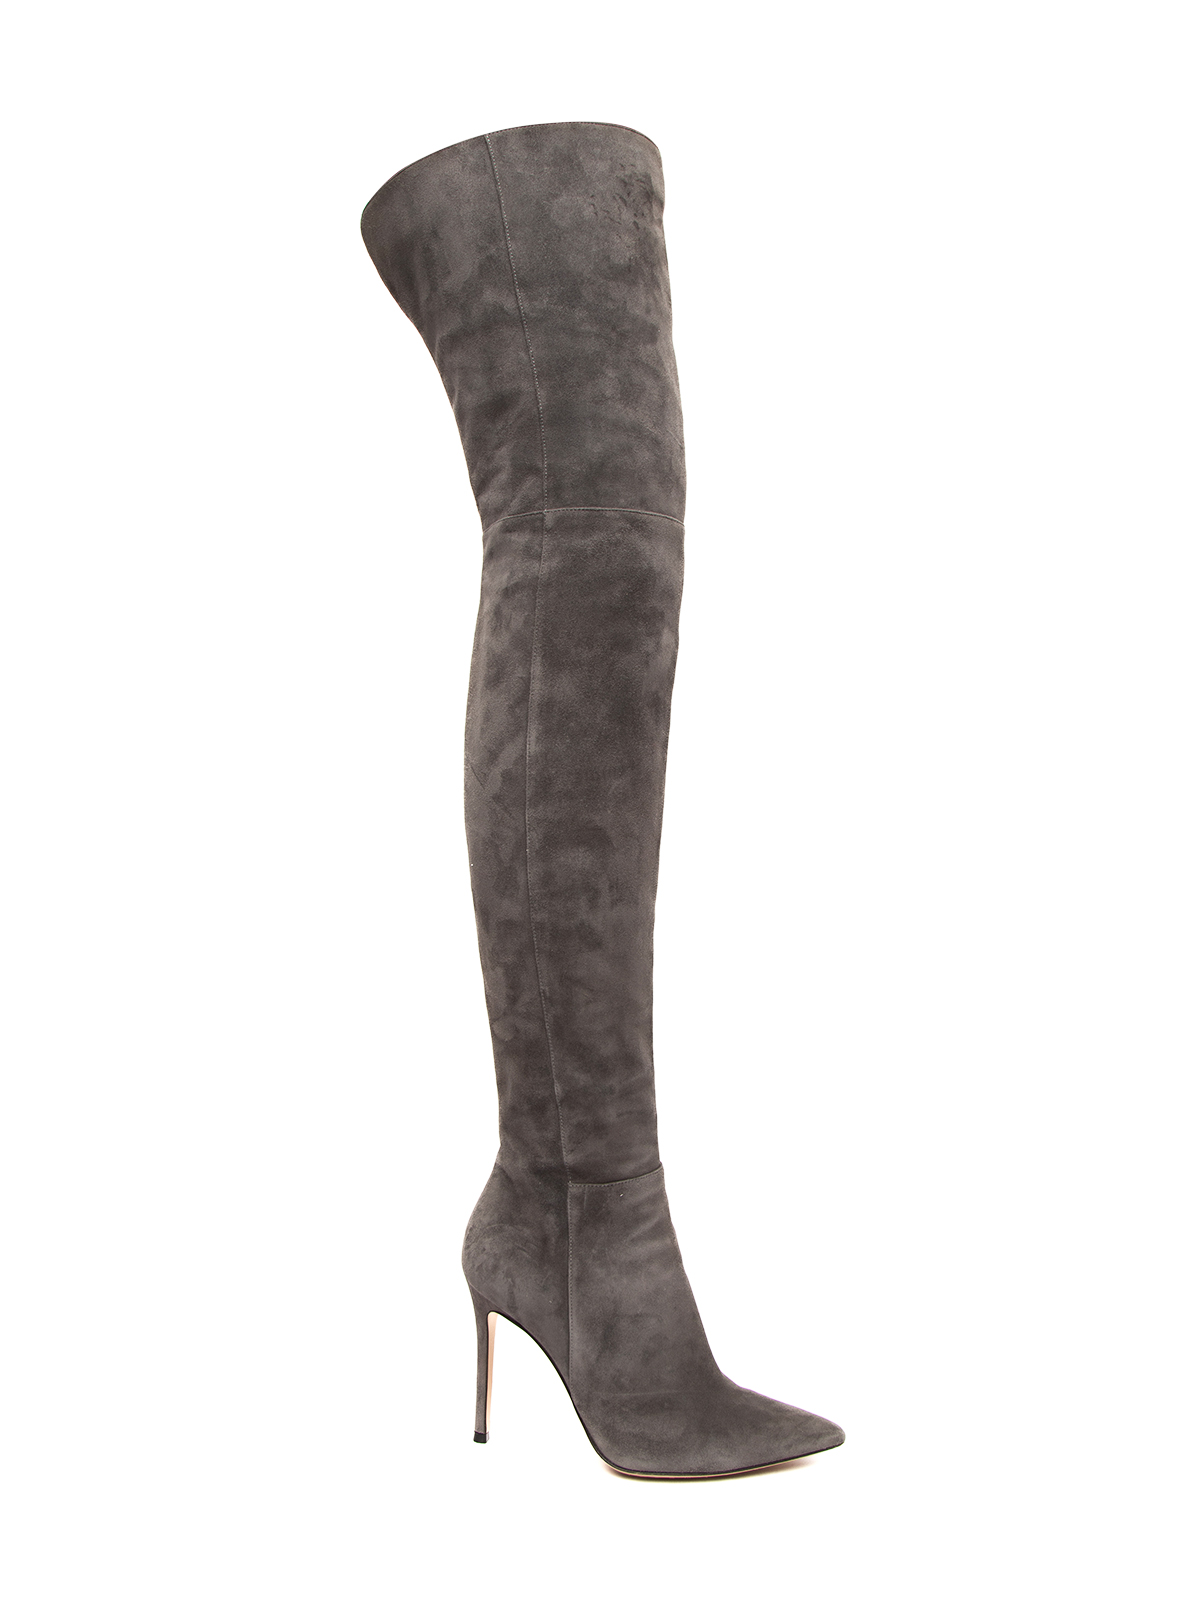 Gianvito Rossi Suede Thigh High Boots